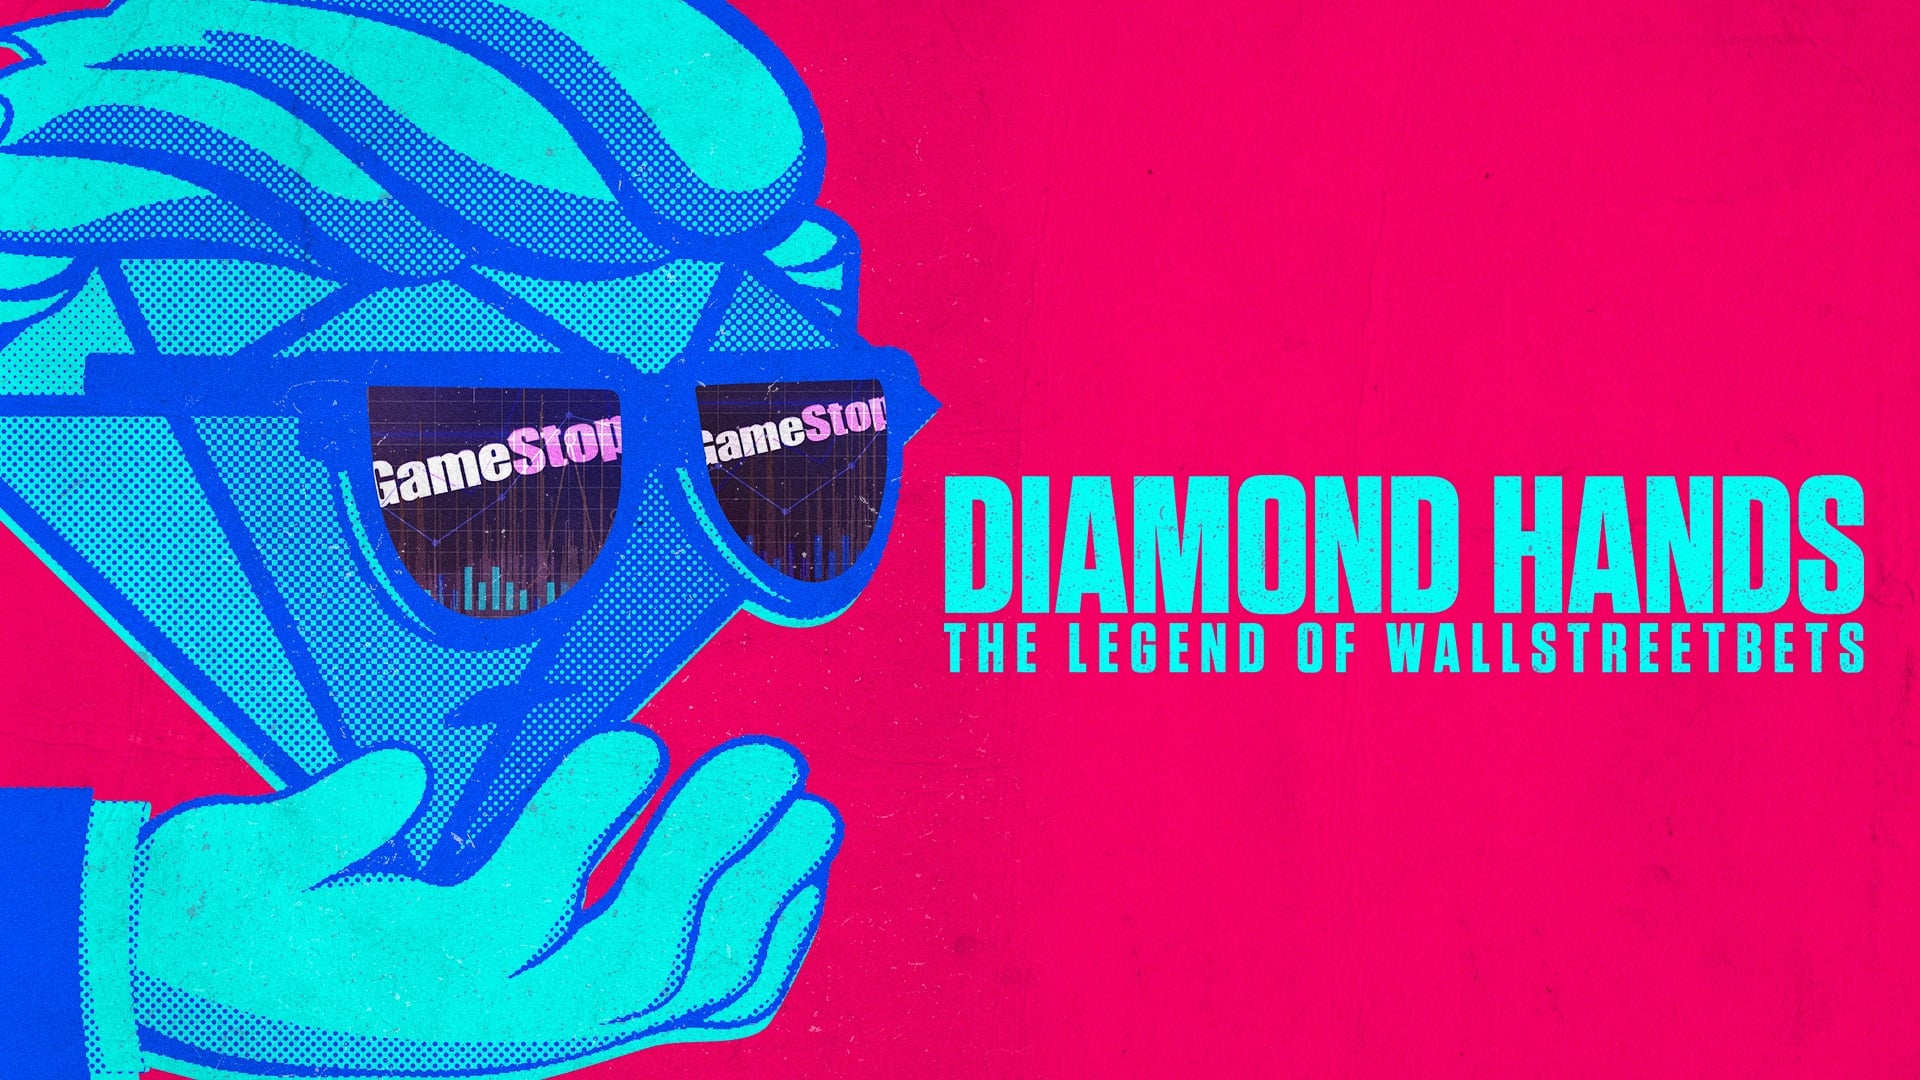 Diamond Hands: The Legend of WallStreetBets 2022 123movies